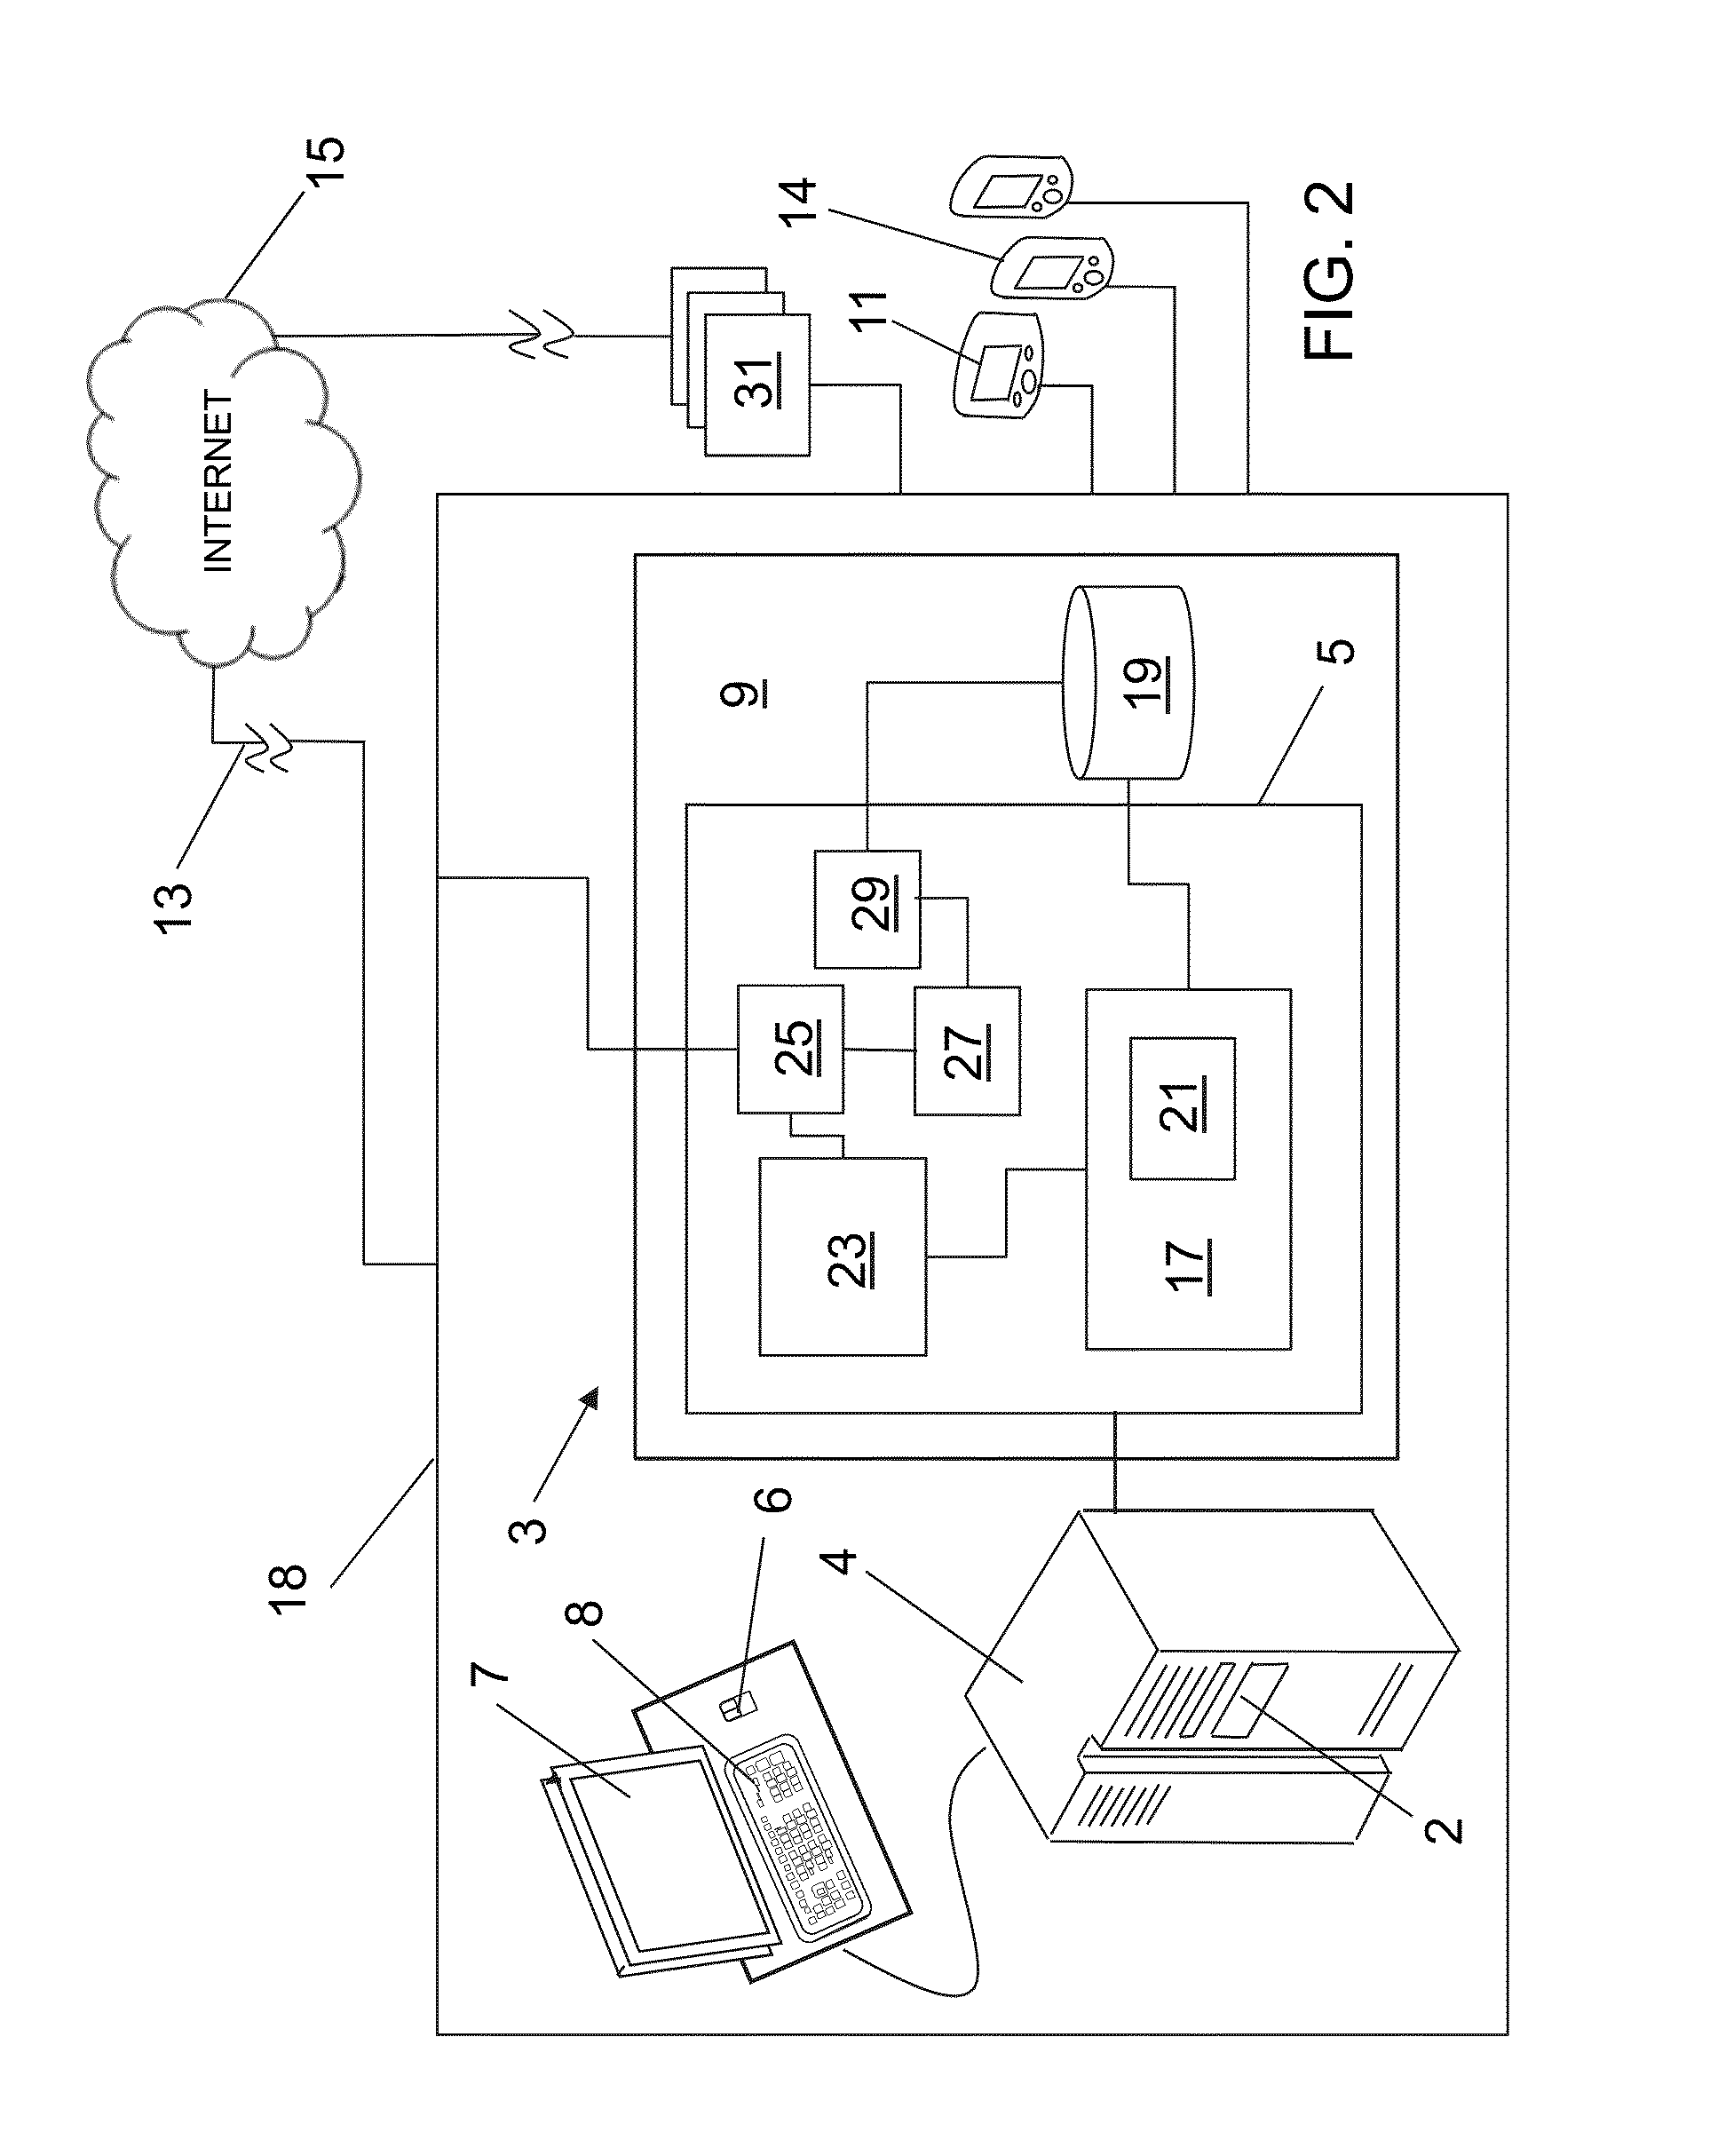 Method and apparatus for the measurement of autonomic function for the diagnosis and validation of patient treatments and outcomes